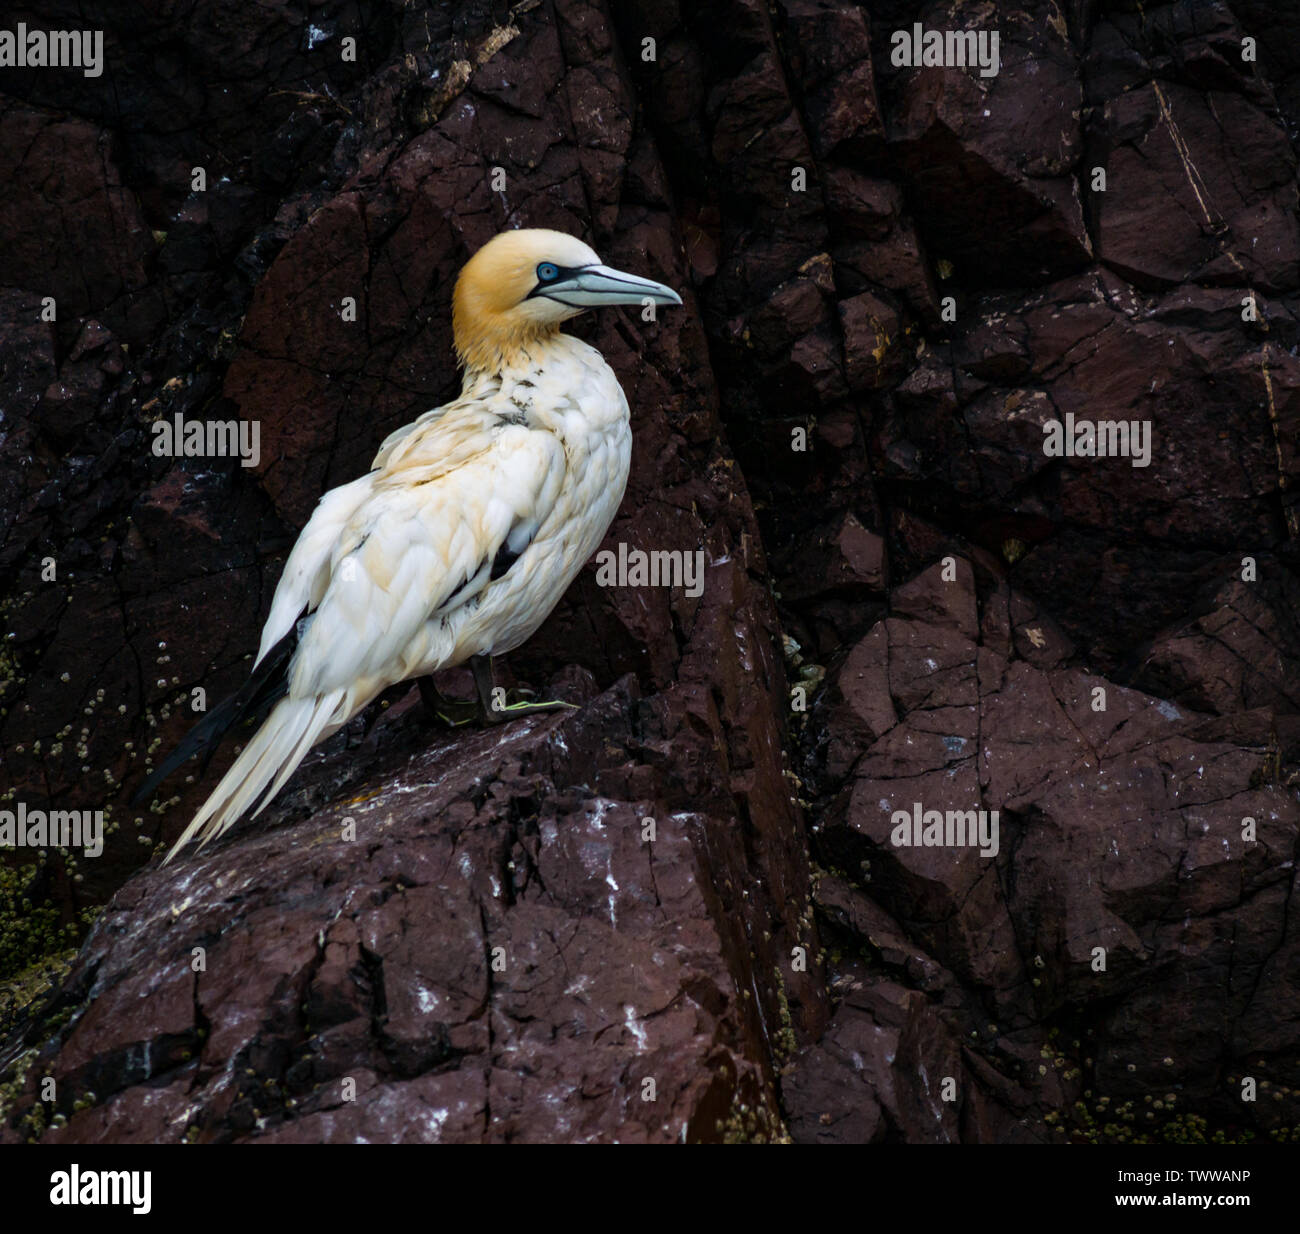 Bass Rock, Firth of Forth, UK. 23rd June 2019. Gannet, Morus bassanus, on a ledge on the steep cliff face of the Bass Rock in the world's largest colony nature reserve which looks in a poor state with dirty and mottled feathers Stock Photo